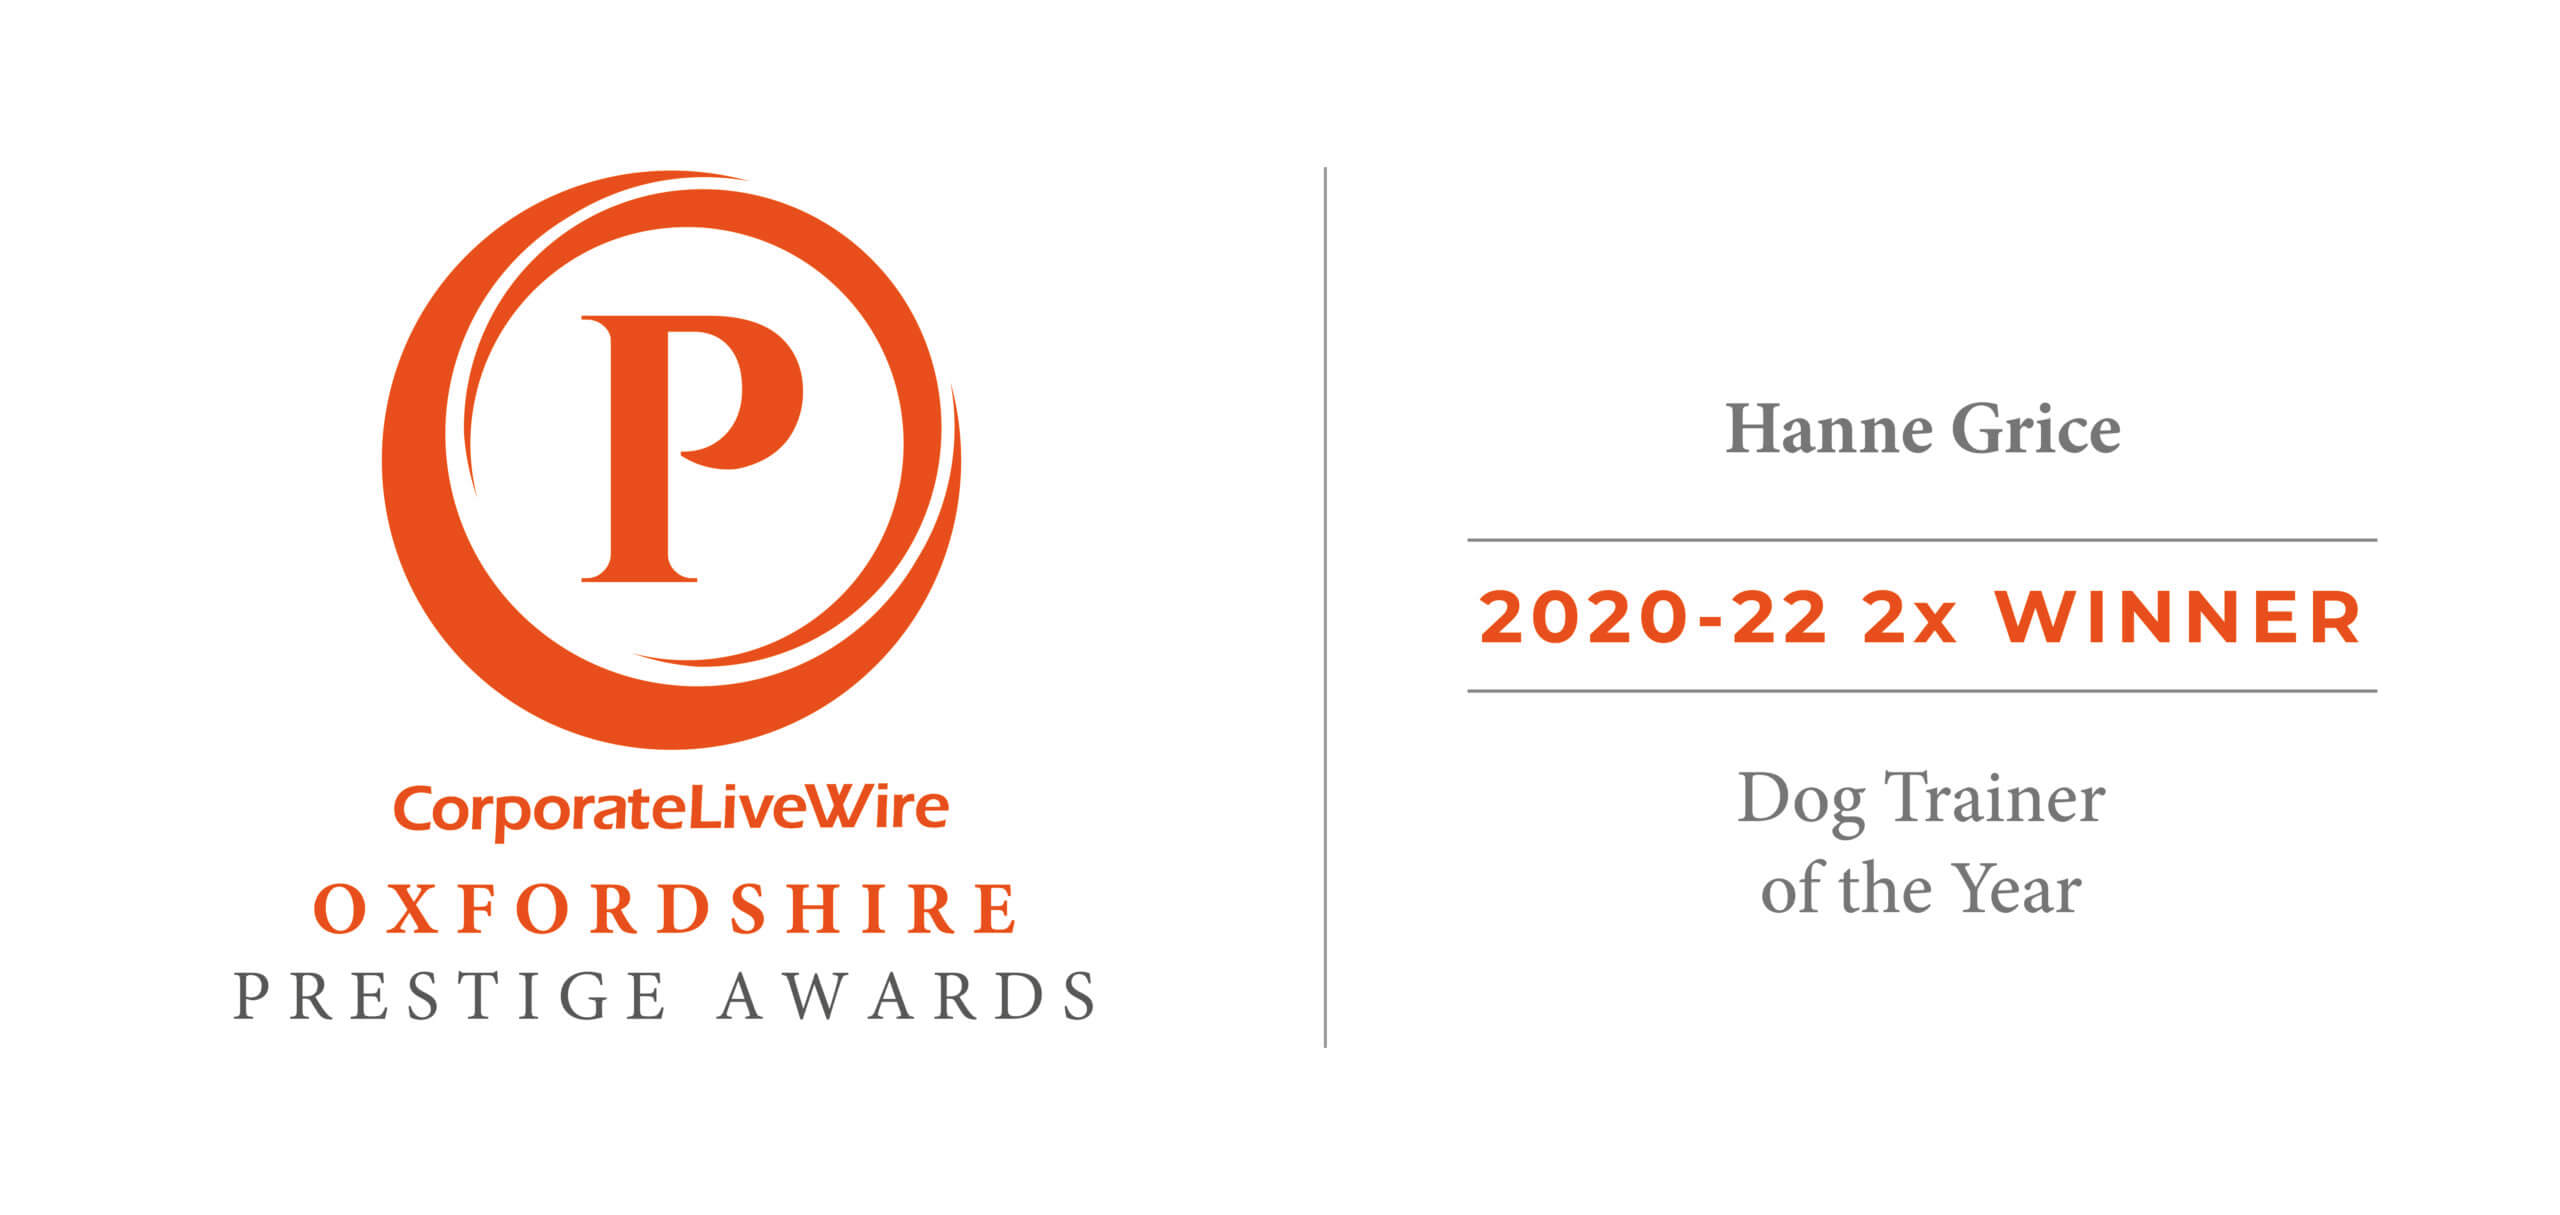 CorporateLiveWire Oxfordshire Prestige Award - Dog Trainer of the Year 2020-22 two-times winner